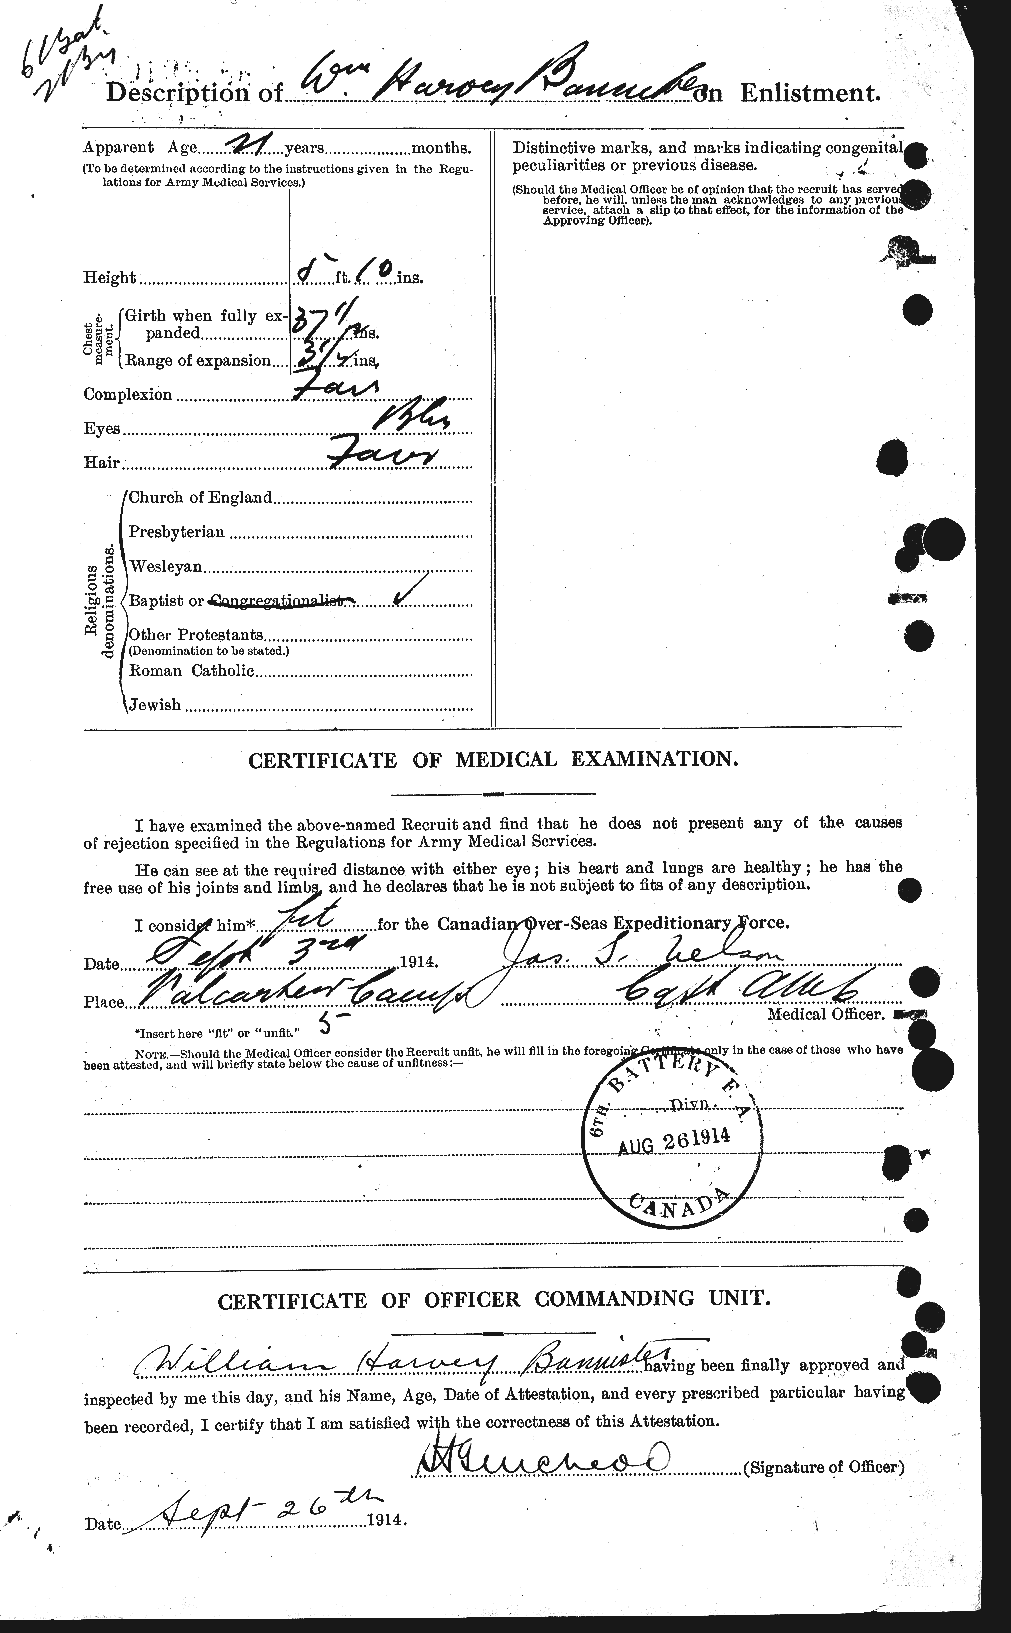 Personnel Records of the First World War - CEF 224751b